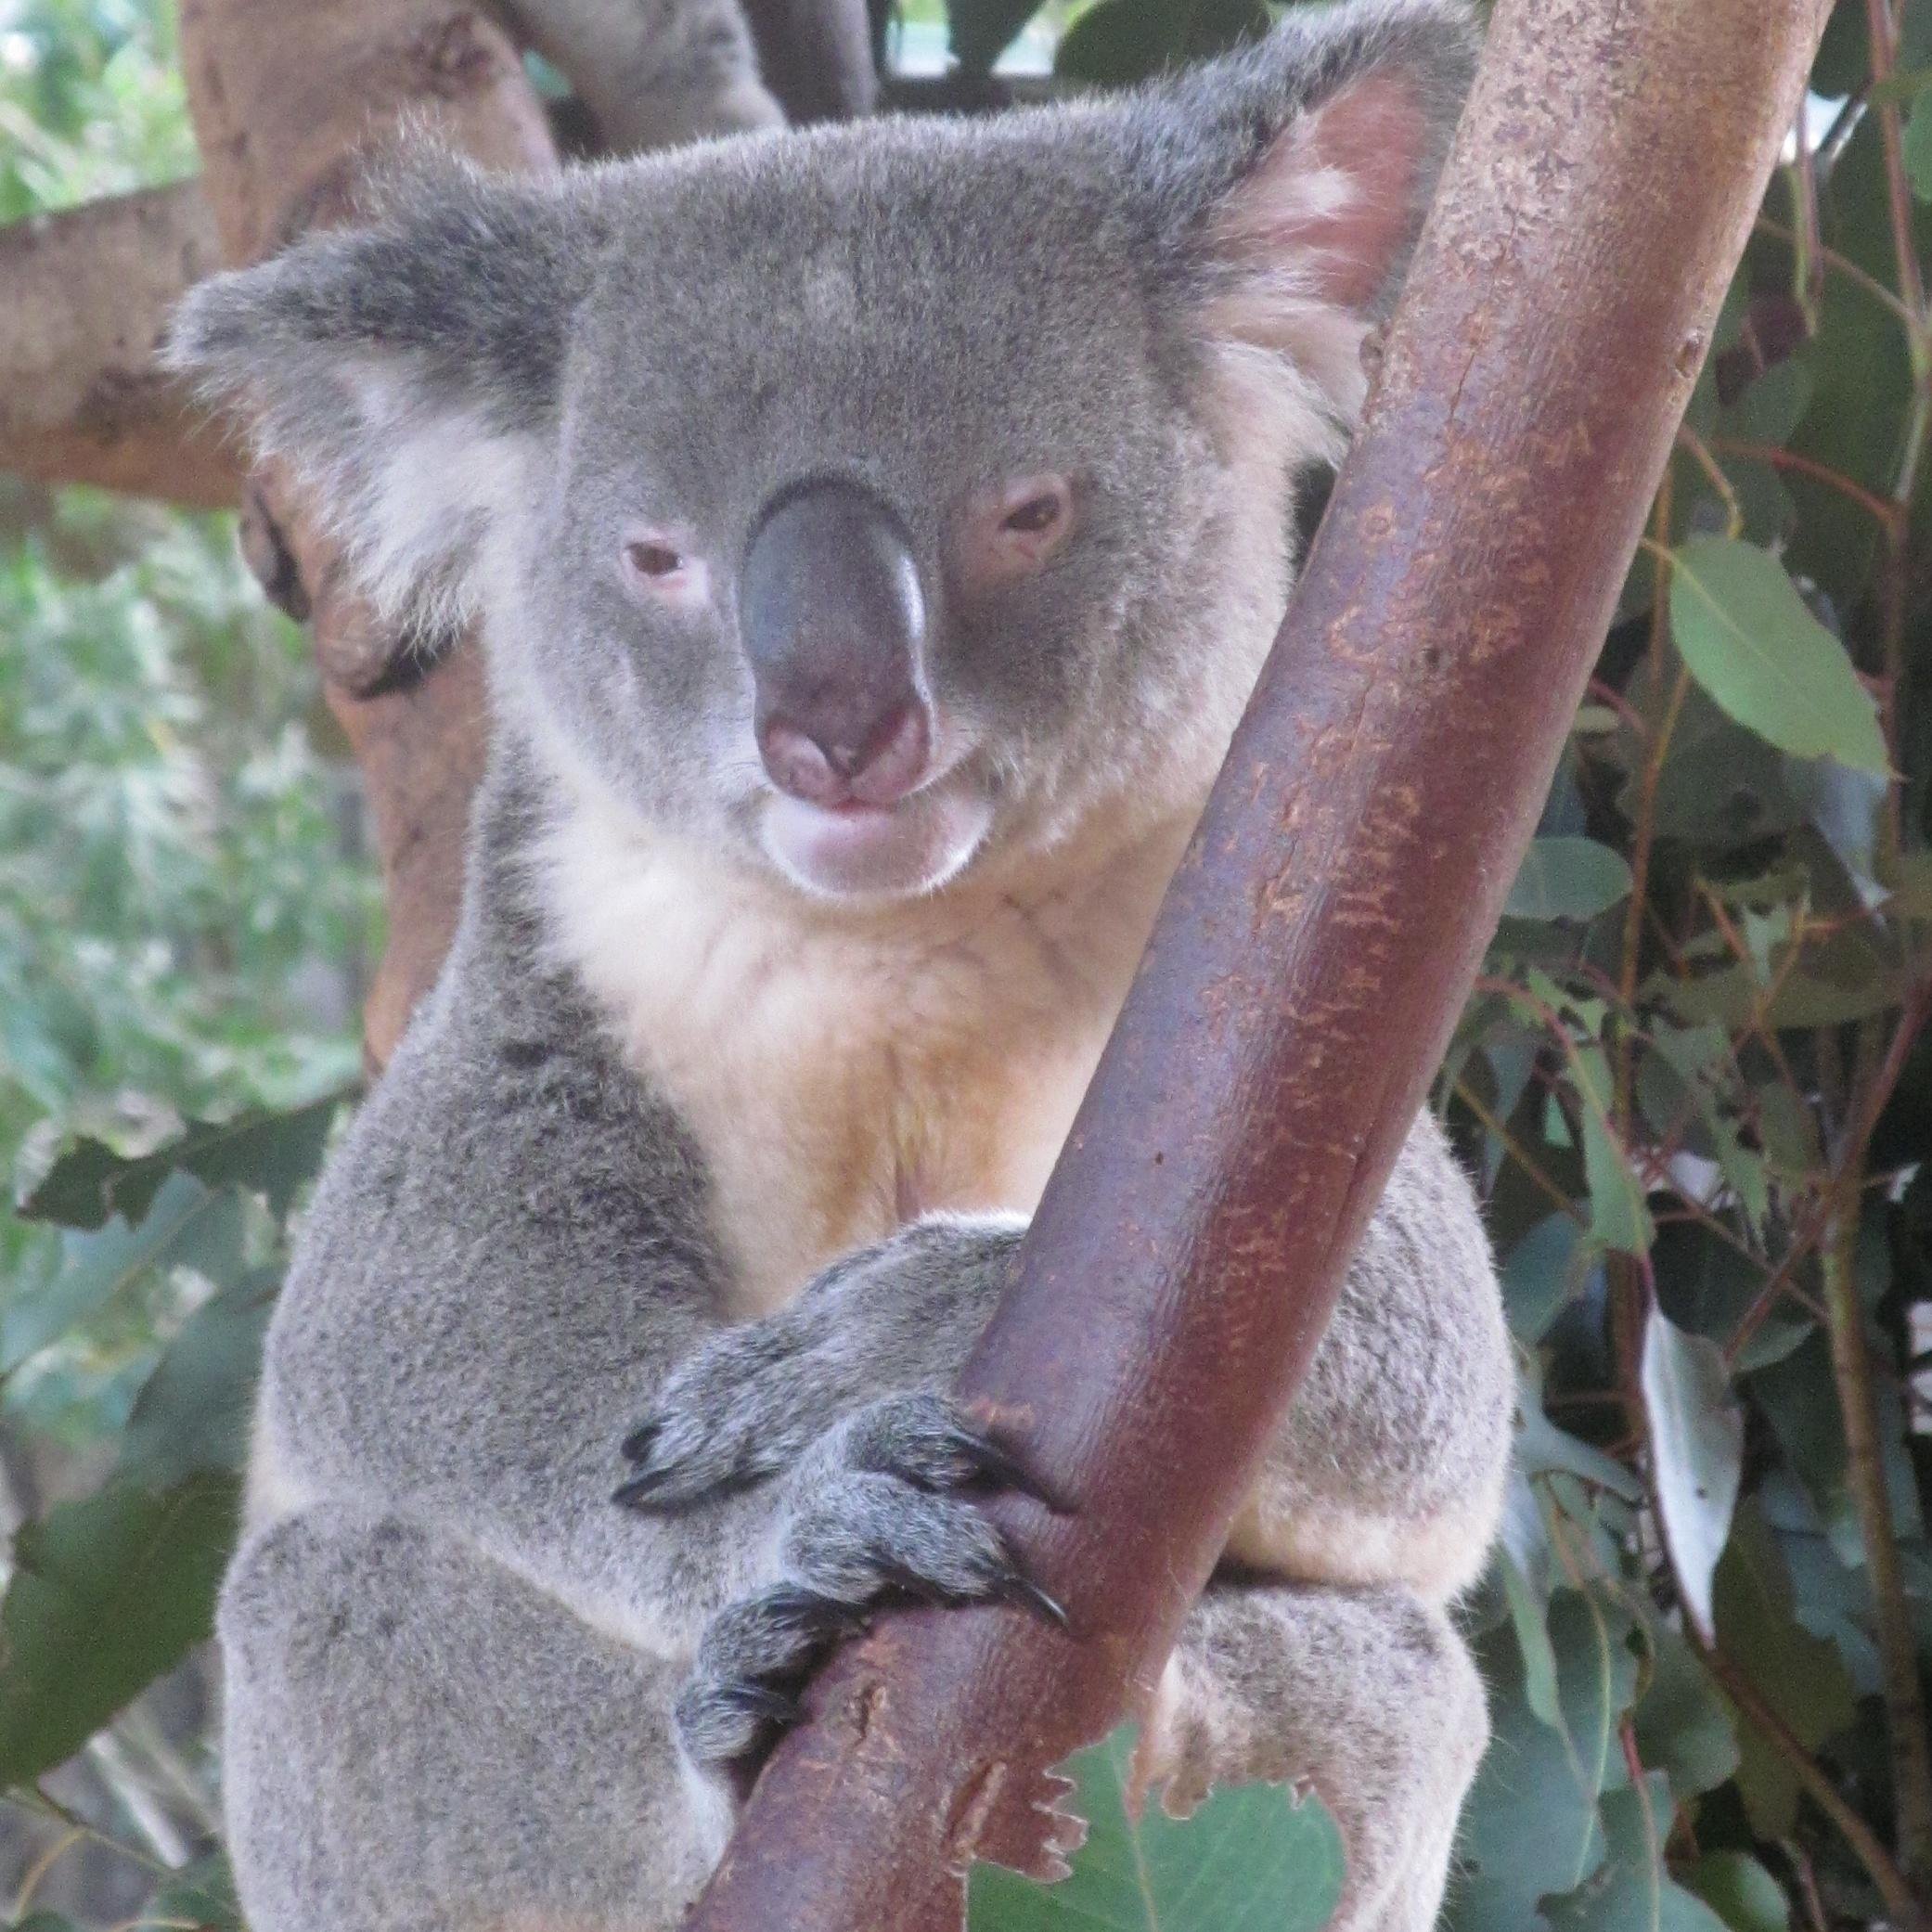 Sydney Uni vet pharmacologist, researching how differences between animal species affects dose rates of veterinary medicines #koalas #vet #wildlife #syd